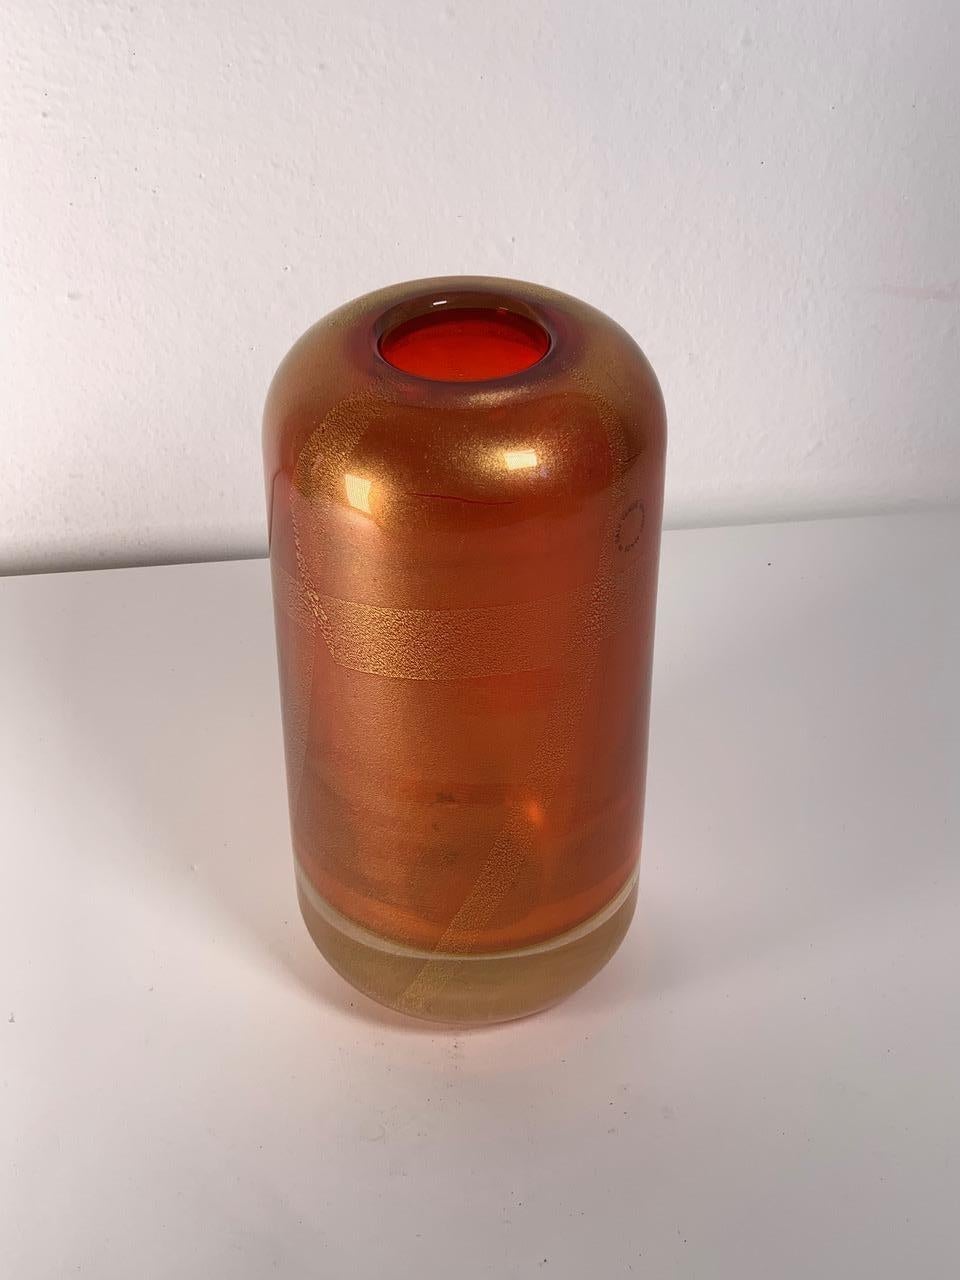 Sommersi Oro vase designed by Laura Diaz de Santillana and produced by Venini in 1992. Signed.